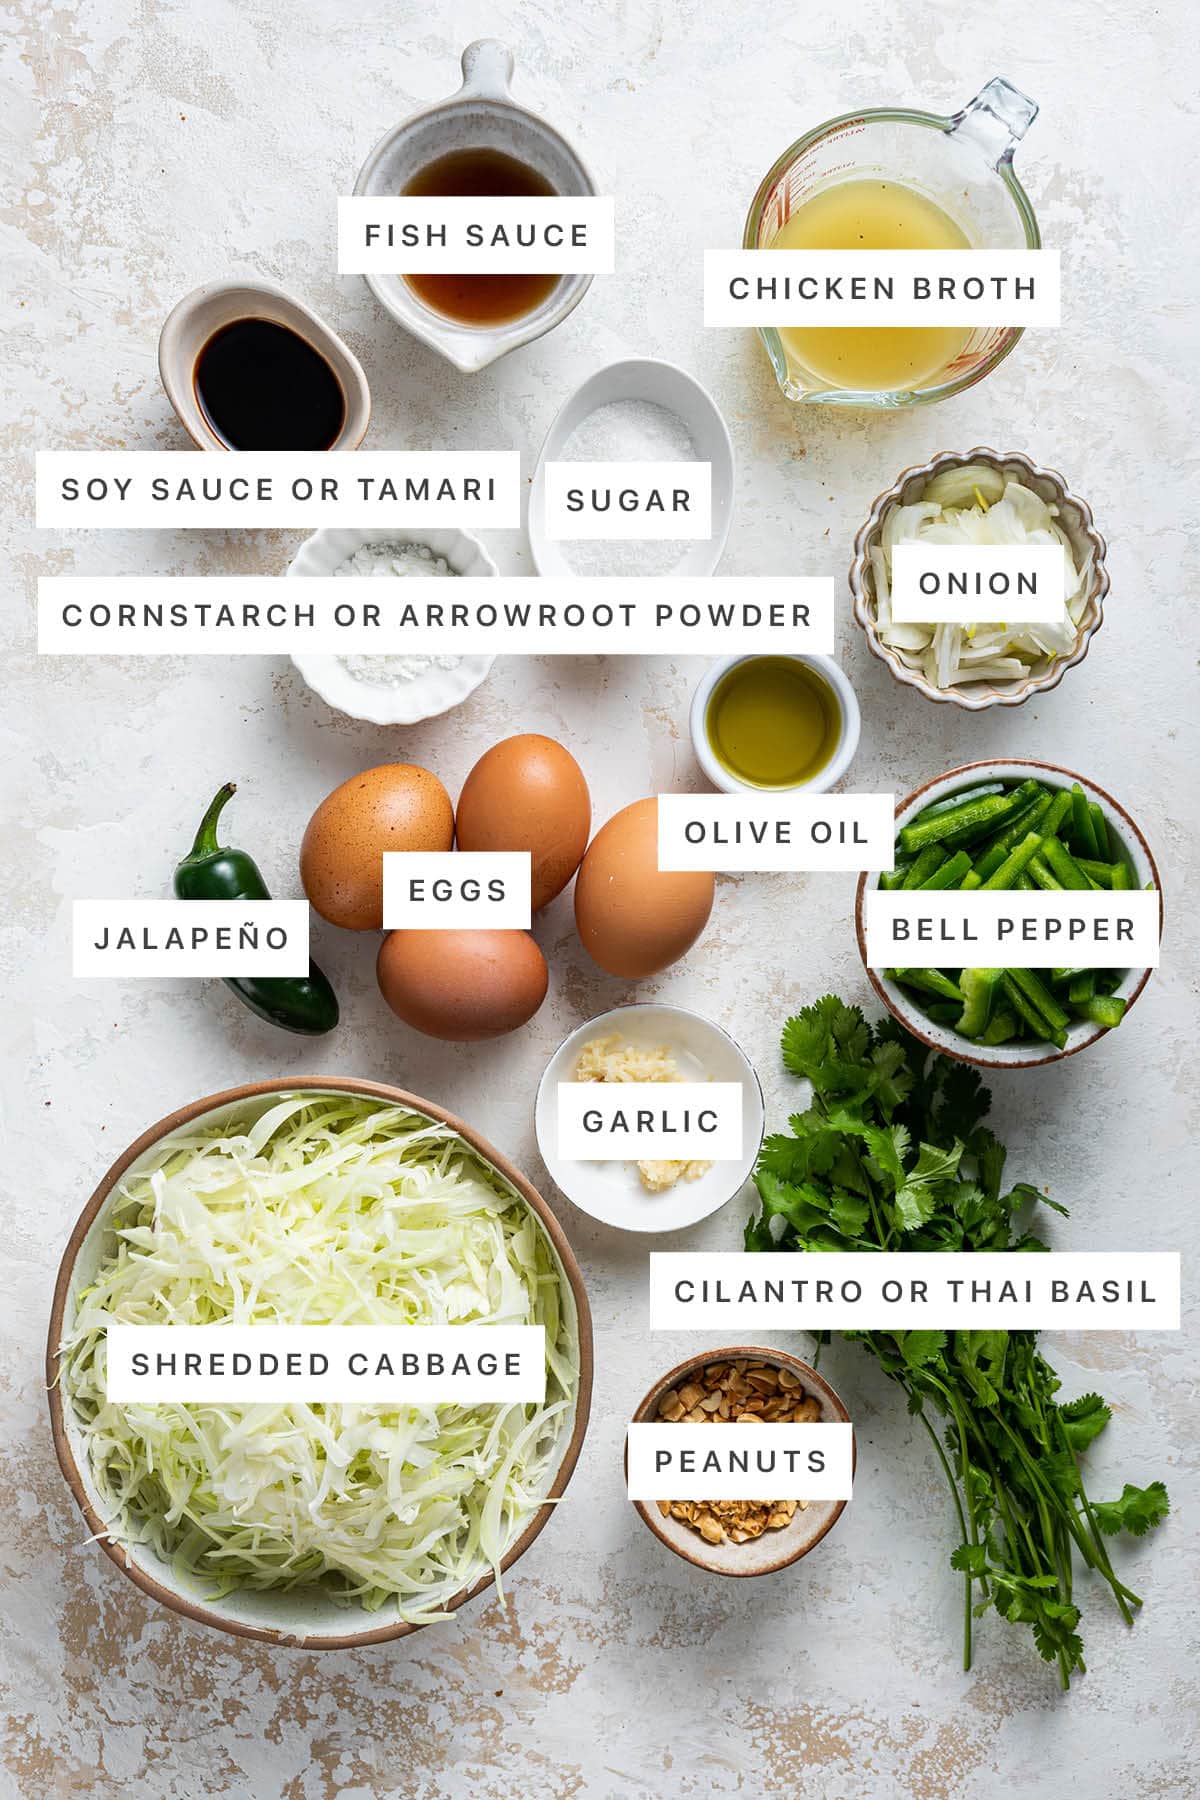 Ingredients measured out to make Healthy Pad Thai: fish sauce, chicken broth, soy sauce, sugar, onion, cornstarch, olive oil, eggs, jalapeño, bell pepper, garlic, cilantro, cabbage and peanuts.